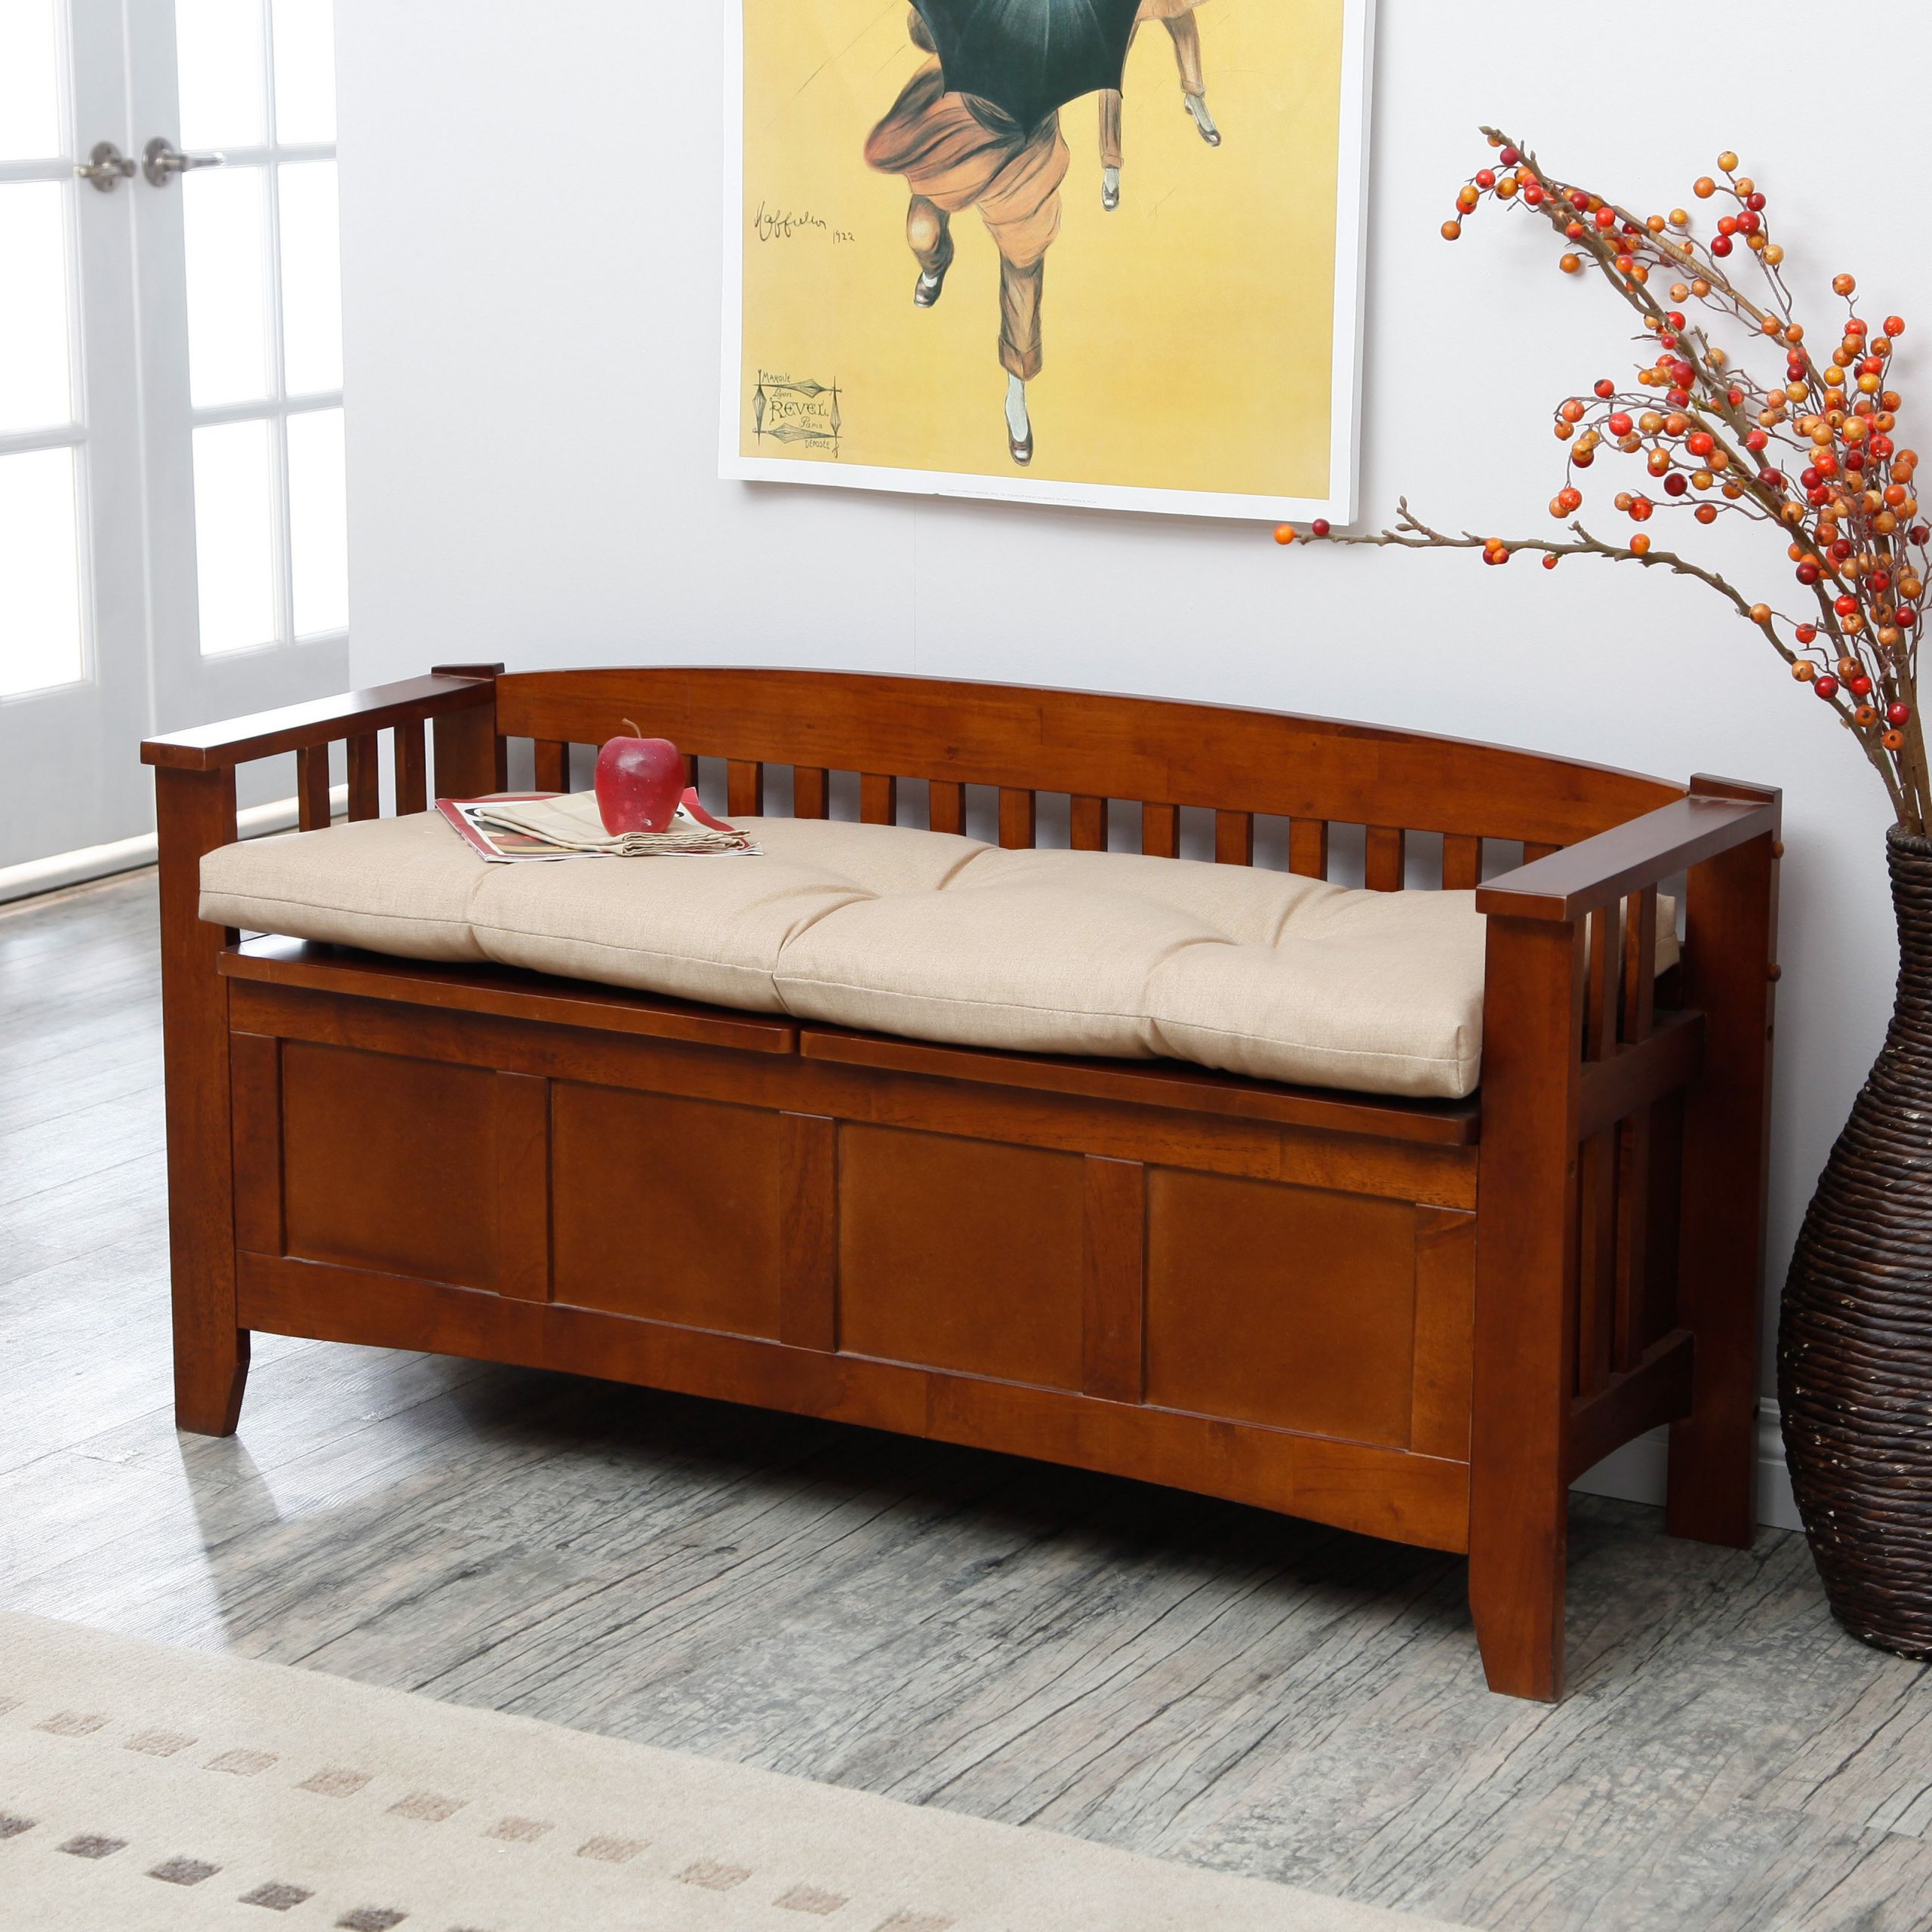 Long Storage Bench With Cushion
 fortable Bench Pads Indoor – HomesFeed